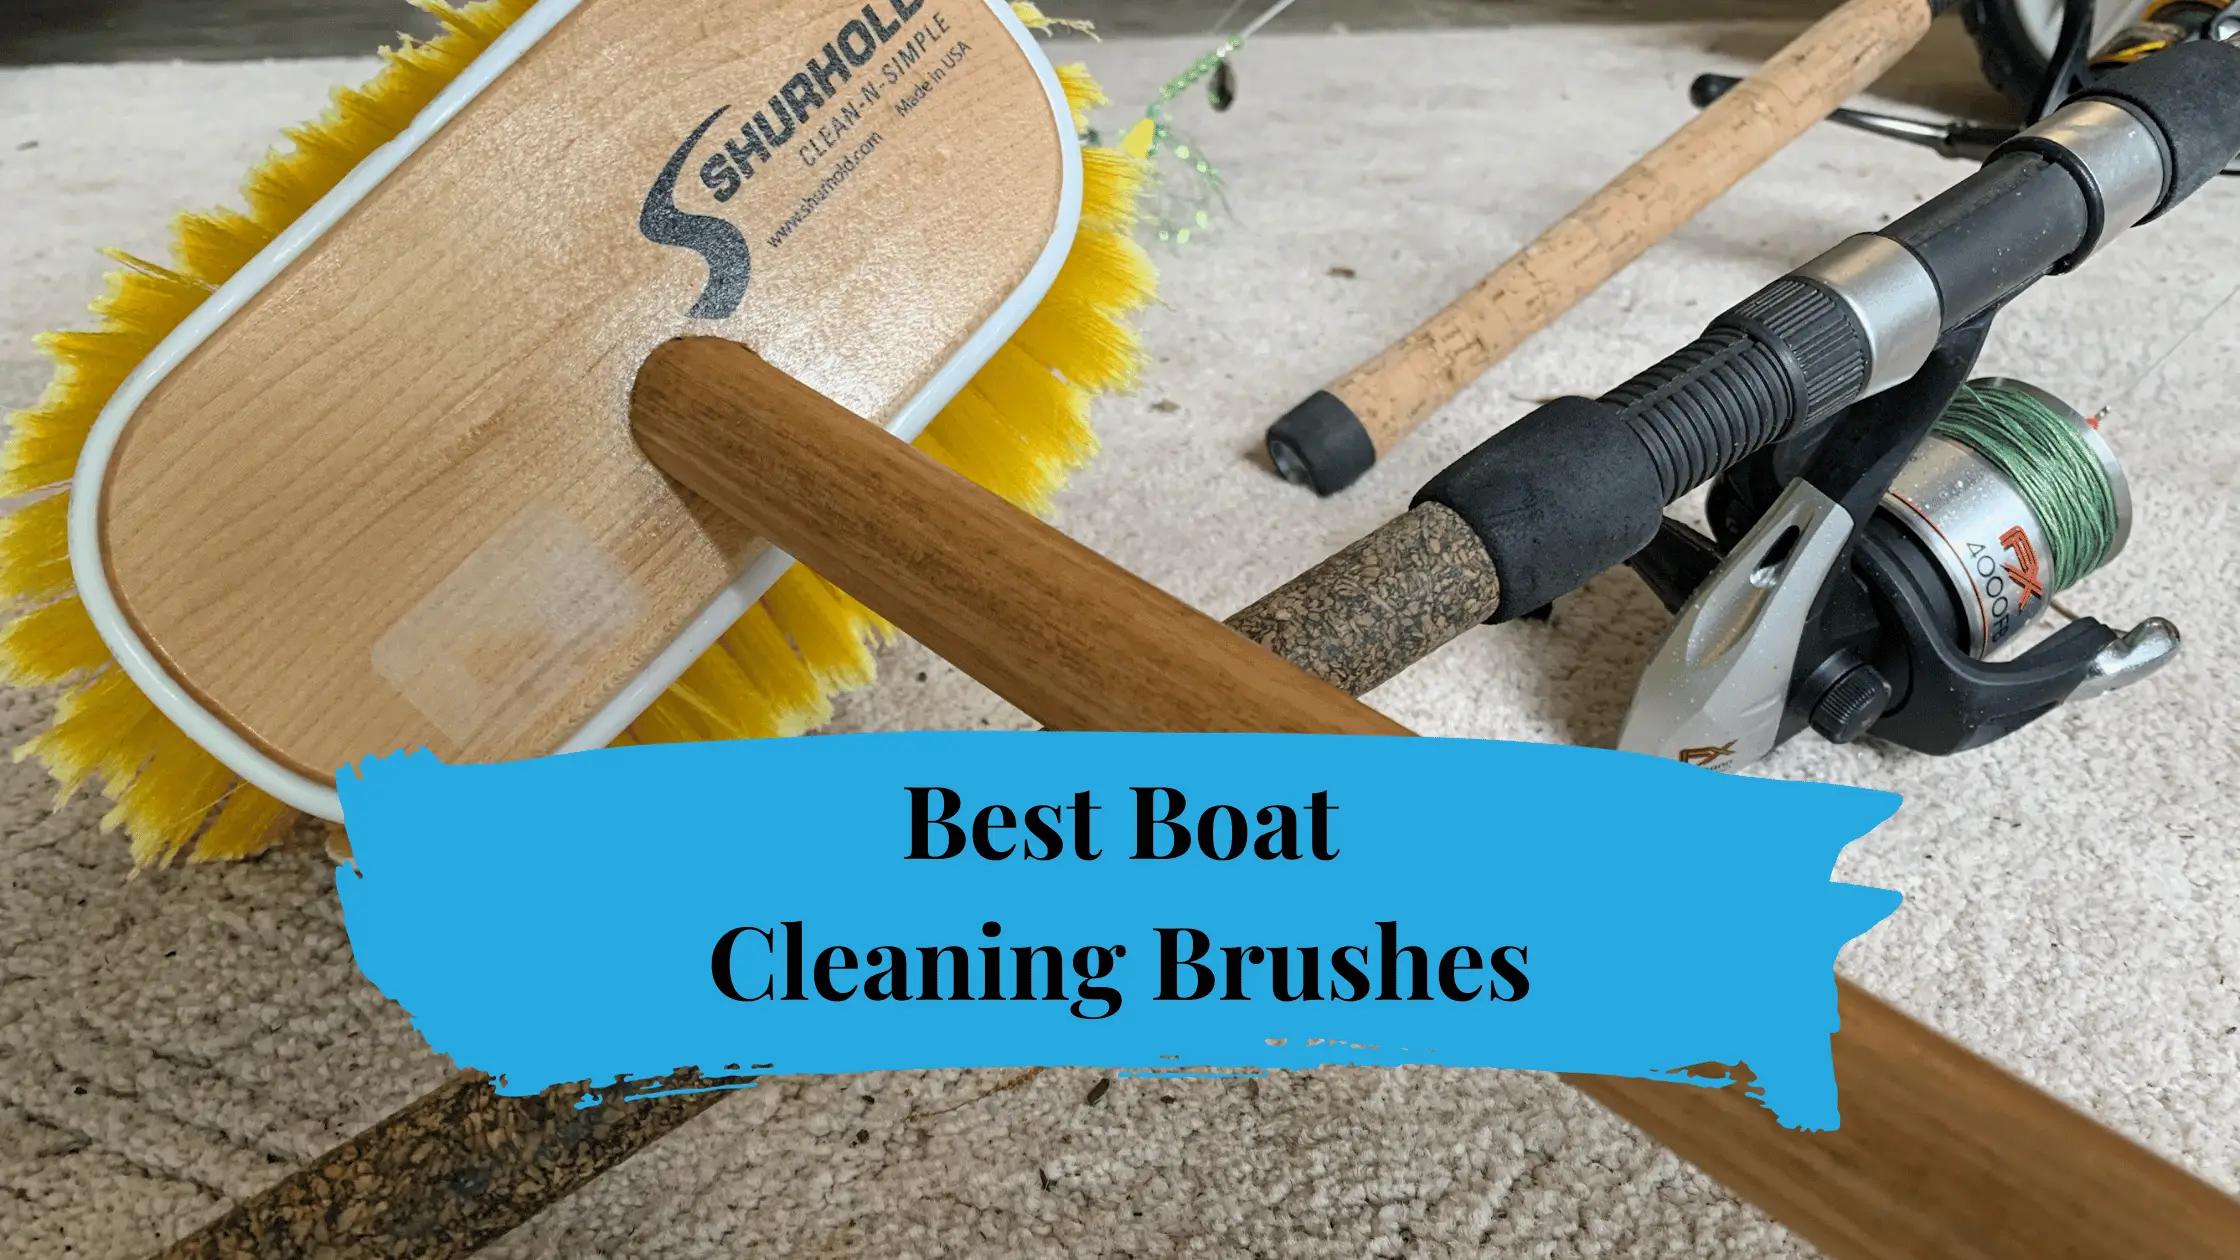 Best Boat Cleaning Brushes